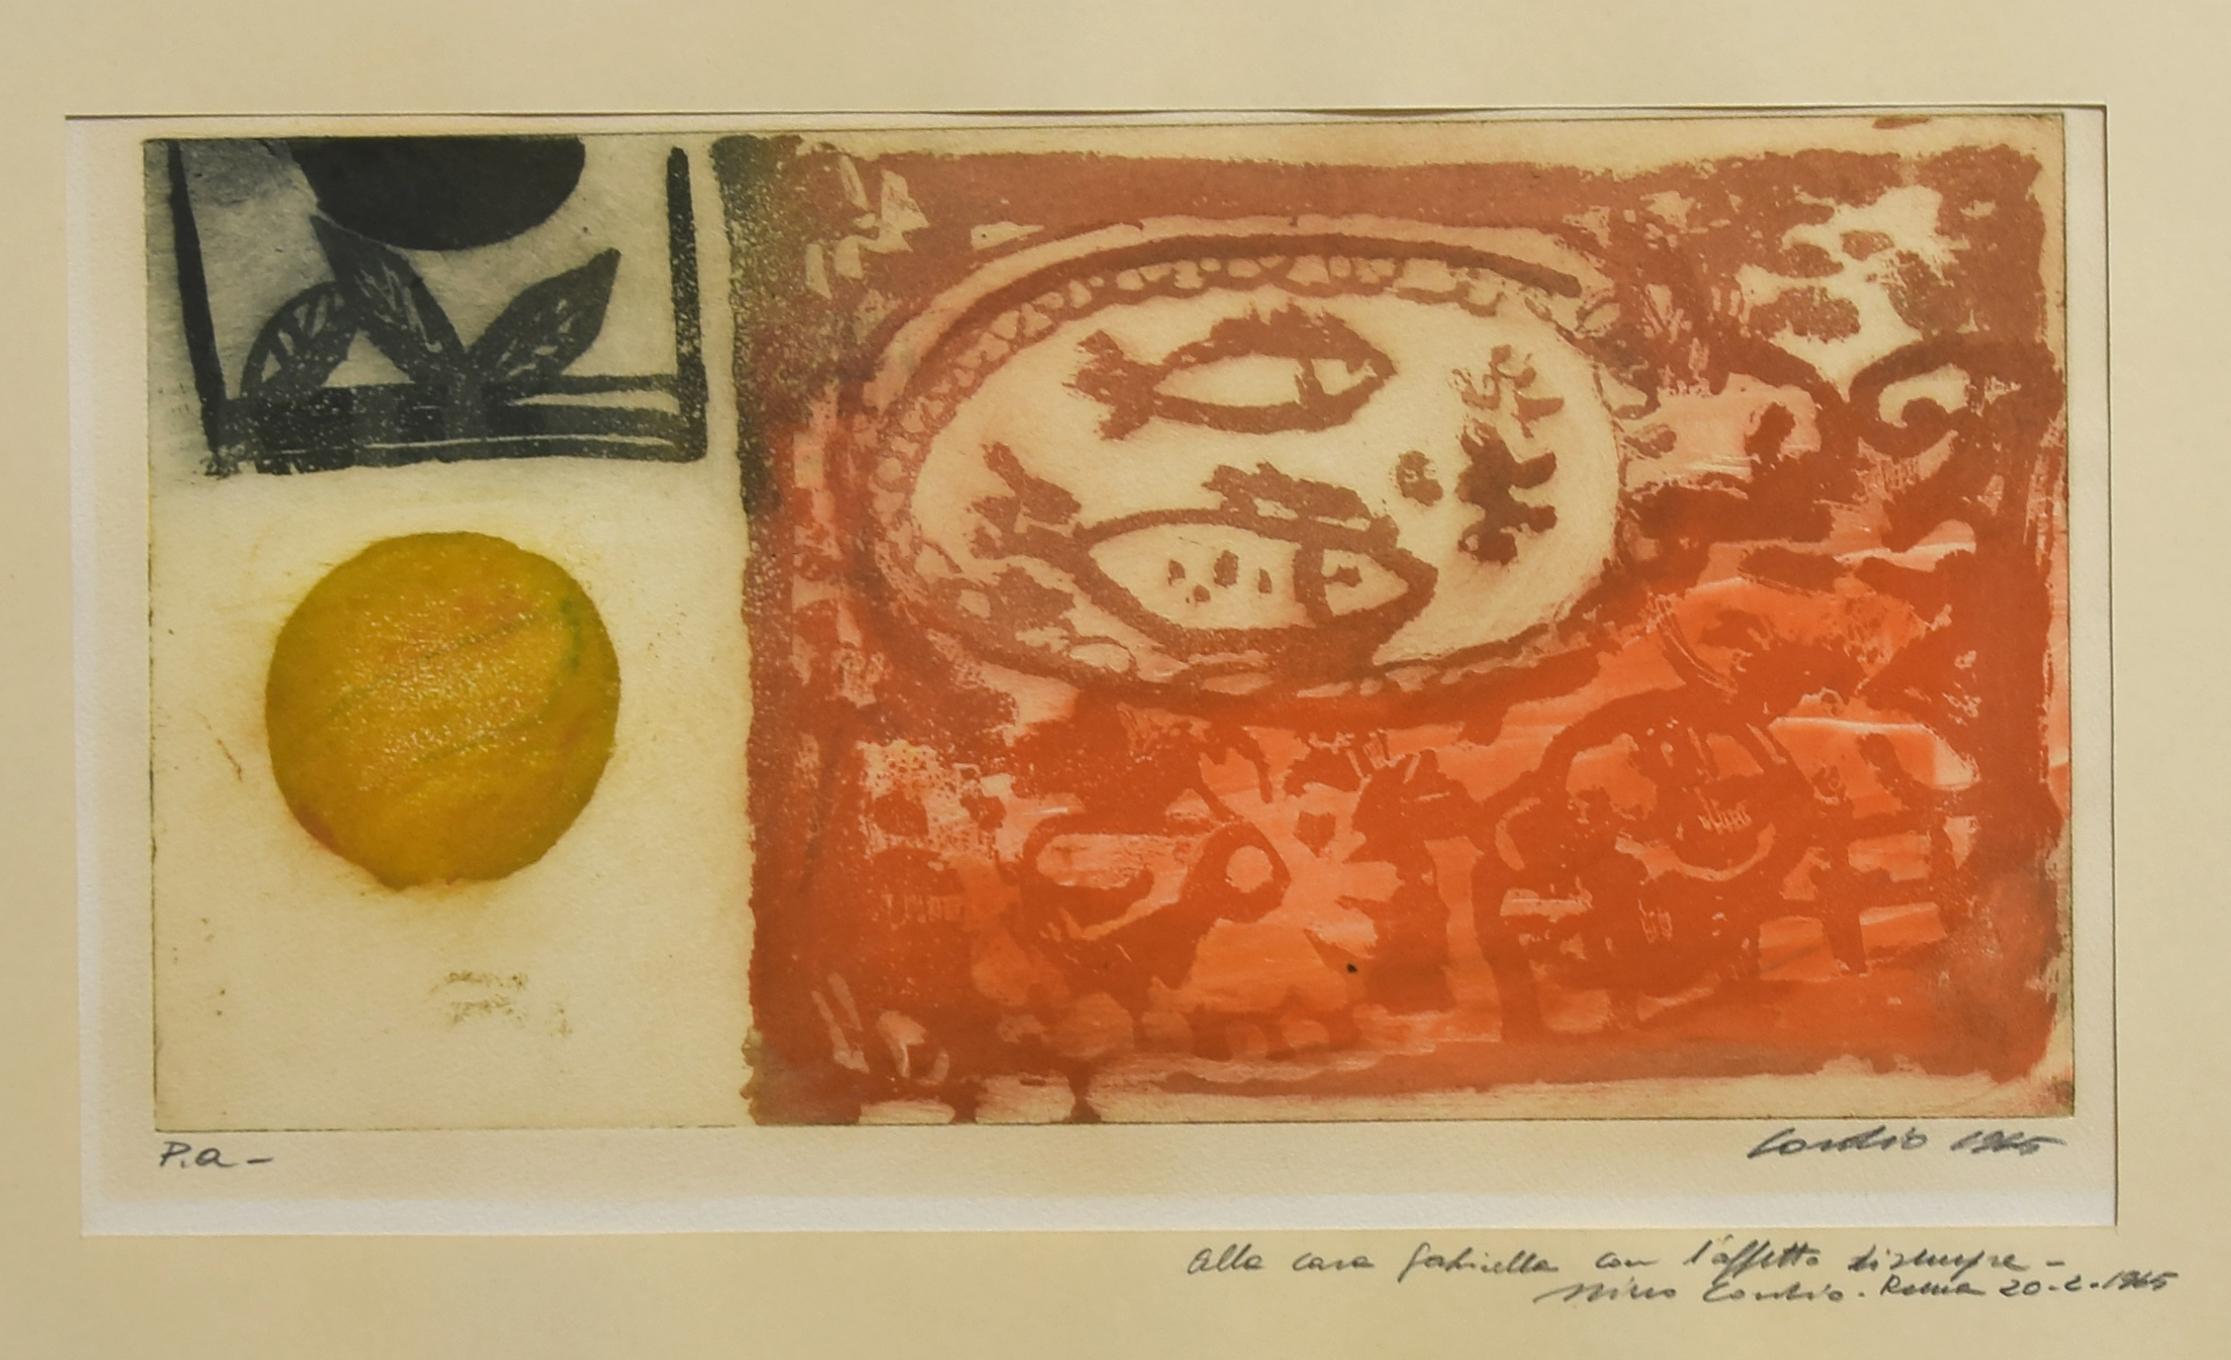 Fishes is an original mixed colored etching realized by Nino Cordio in 1965.

Hand signed and dated on the lower right margin. 

Artist's proof. Hand-written dedication on the lower margin.

Nino Cordio (Santa Ninfa, 10 July 1937 - Rome, 24 April